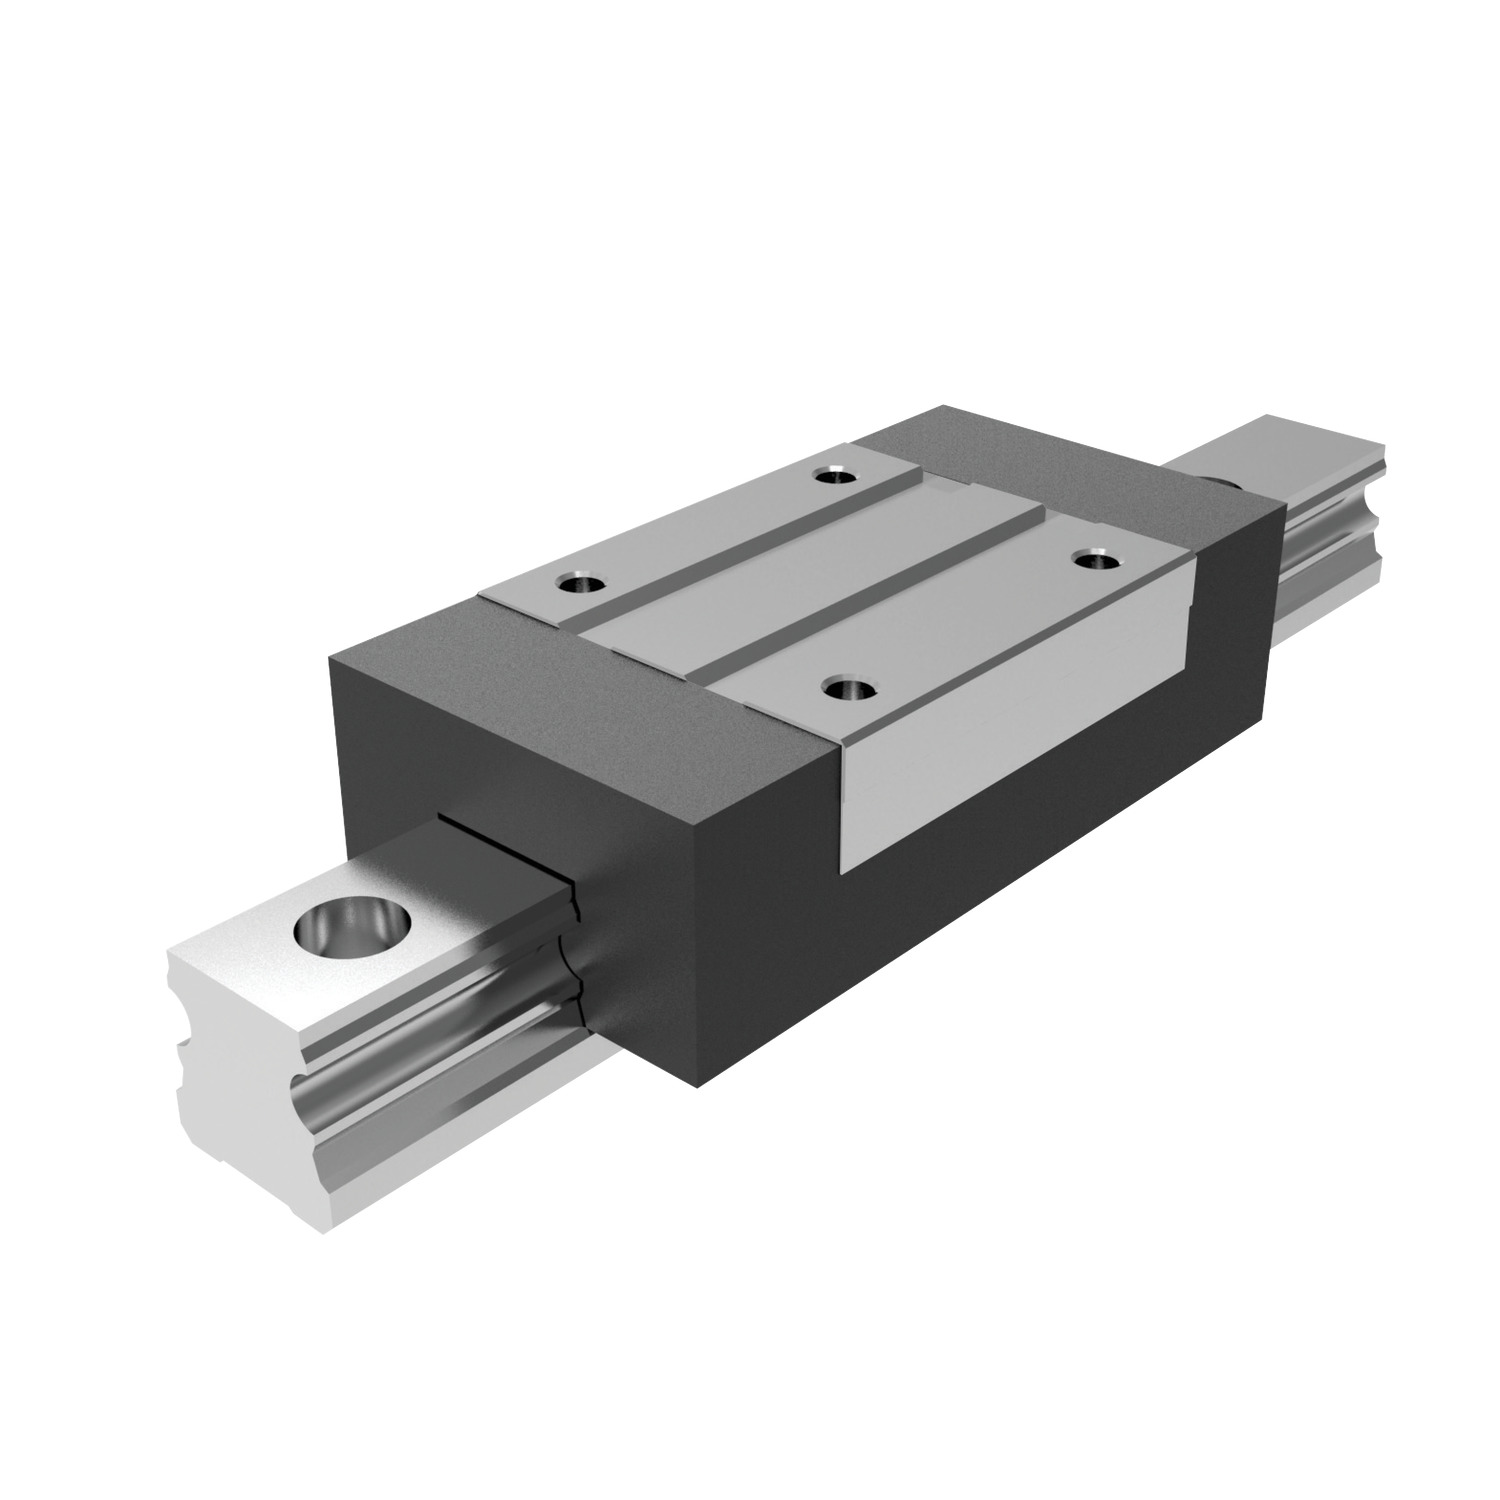 Unflanged Aluminium Carriages Unflanged carriages for aluminium linear guideways. Ideal for applications where weight efficiency is a priority, such as for aviation parts.